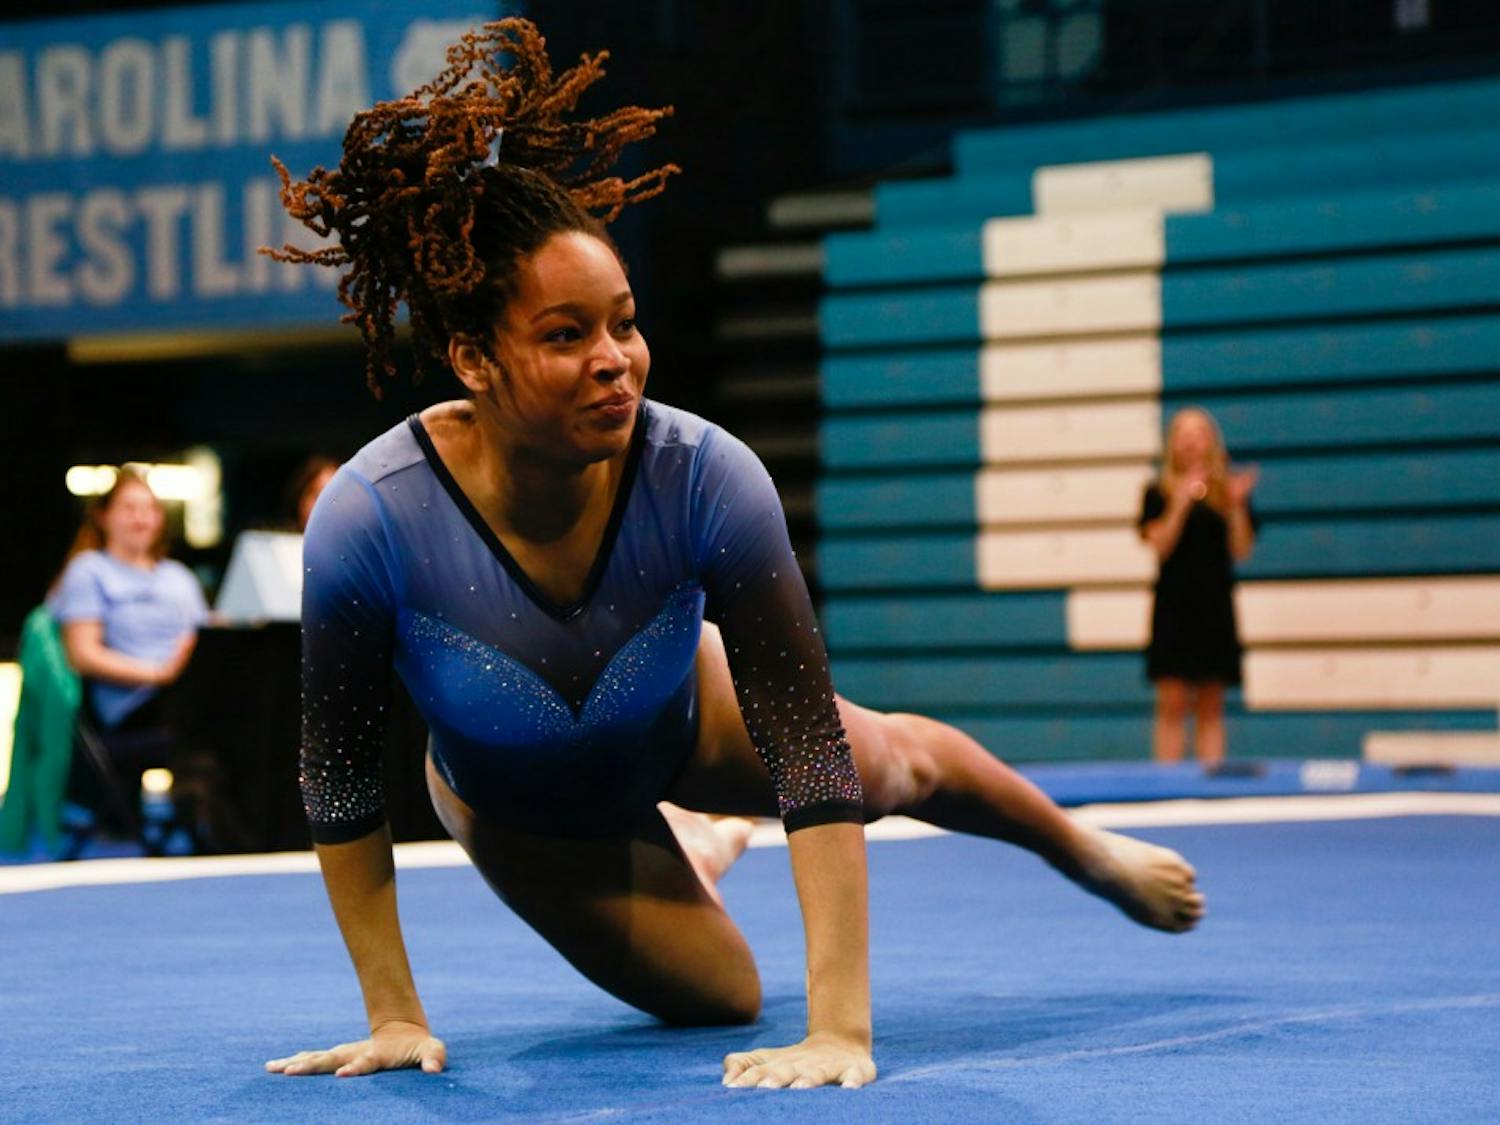 Junior Mikayla Robinson performs her floor routine at the women's gymnastic meet against Towson University on Saturday, Feb. 9, 2019 in Carmicheal Arena.